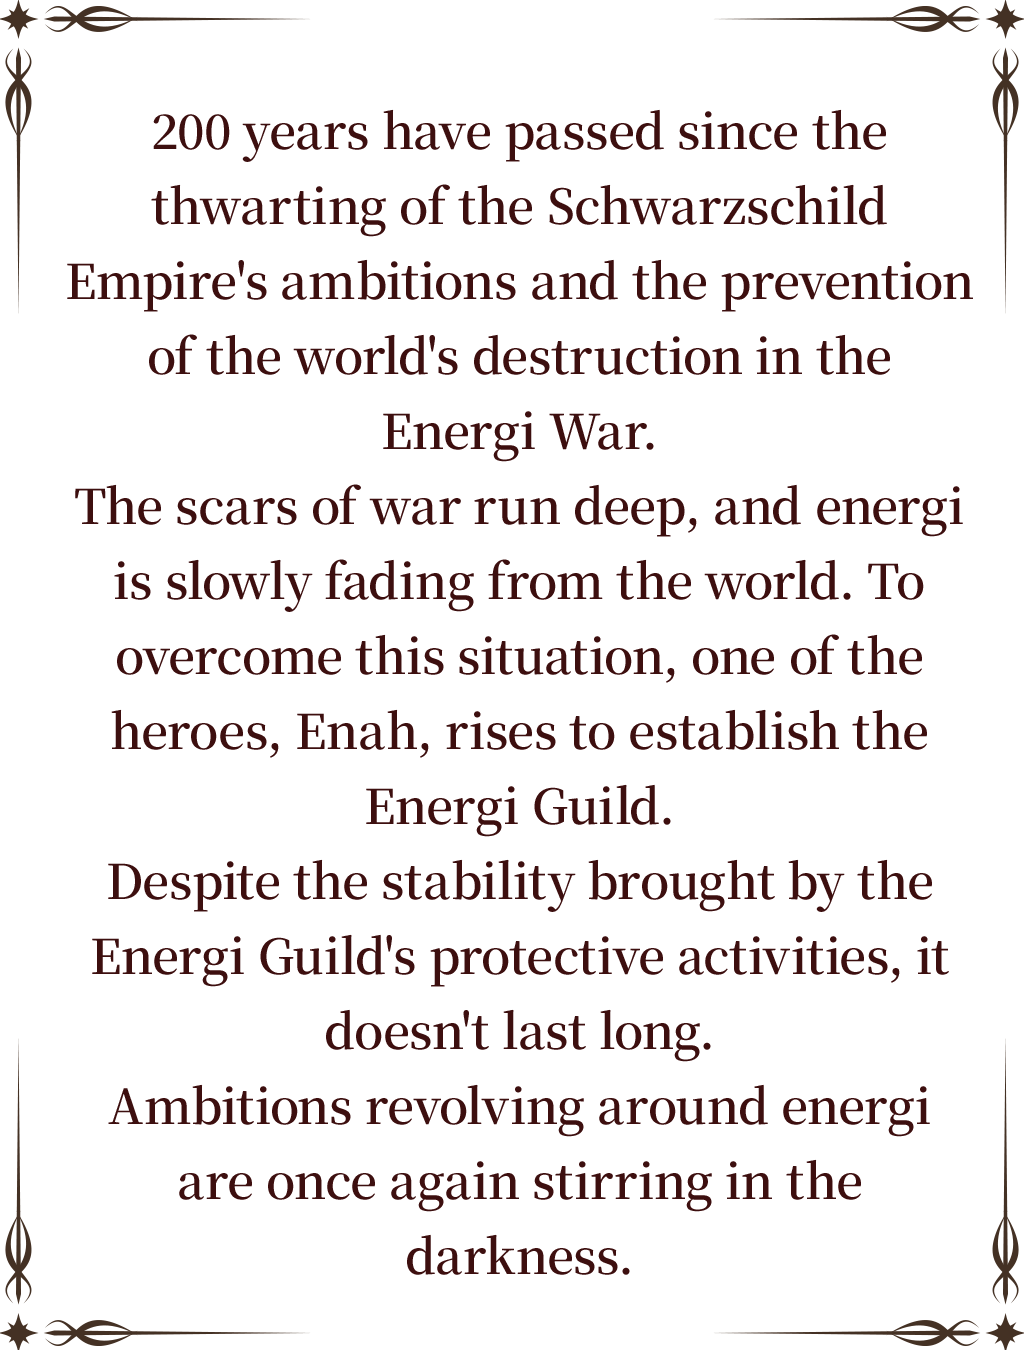 200 years have passed since the thwarting of the Schwarzschild Empire's ambitions and the prevention of the world's destruction in the Energi War.
The scars of war run deep, and energi is slowly fading from the world. To overcome this situation, one of the heroes, Enah, rises to establish the Energi Guild.
Despite the stability brought by the Energi Guild's protective activities, it doesn't last long.
Ambitions revolving around energi are once again stirring in the darkness.